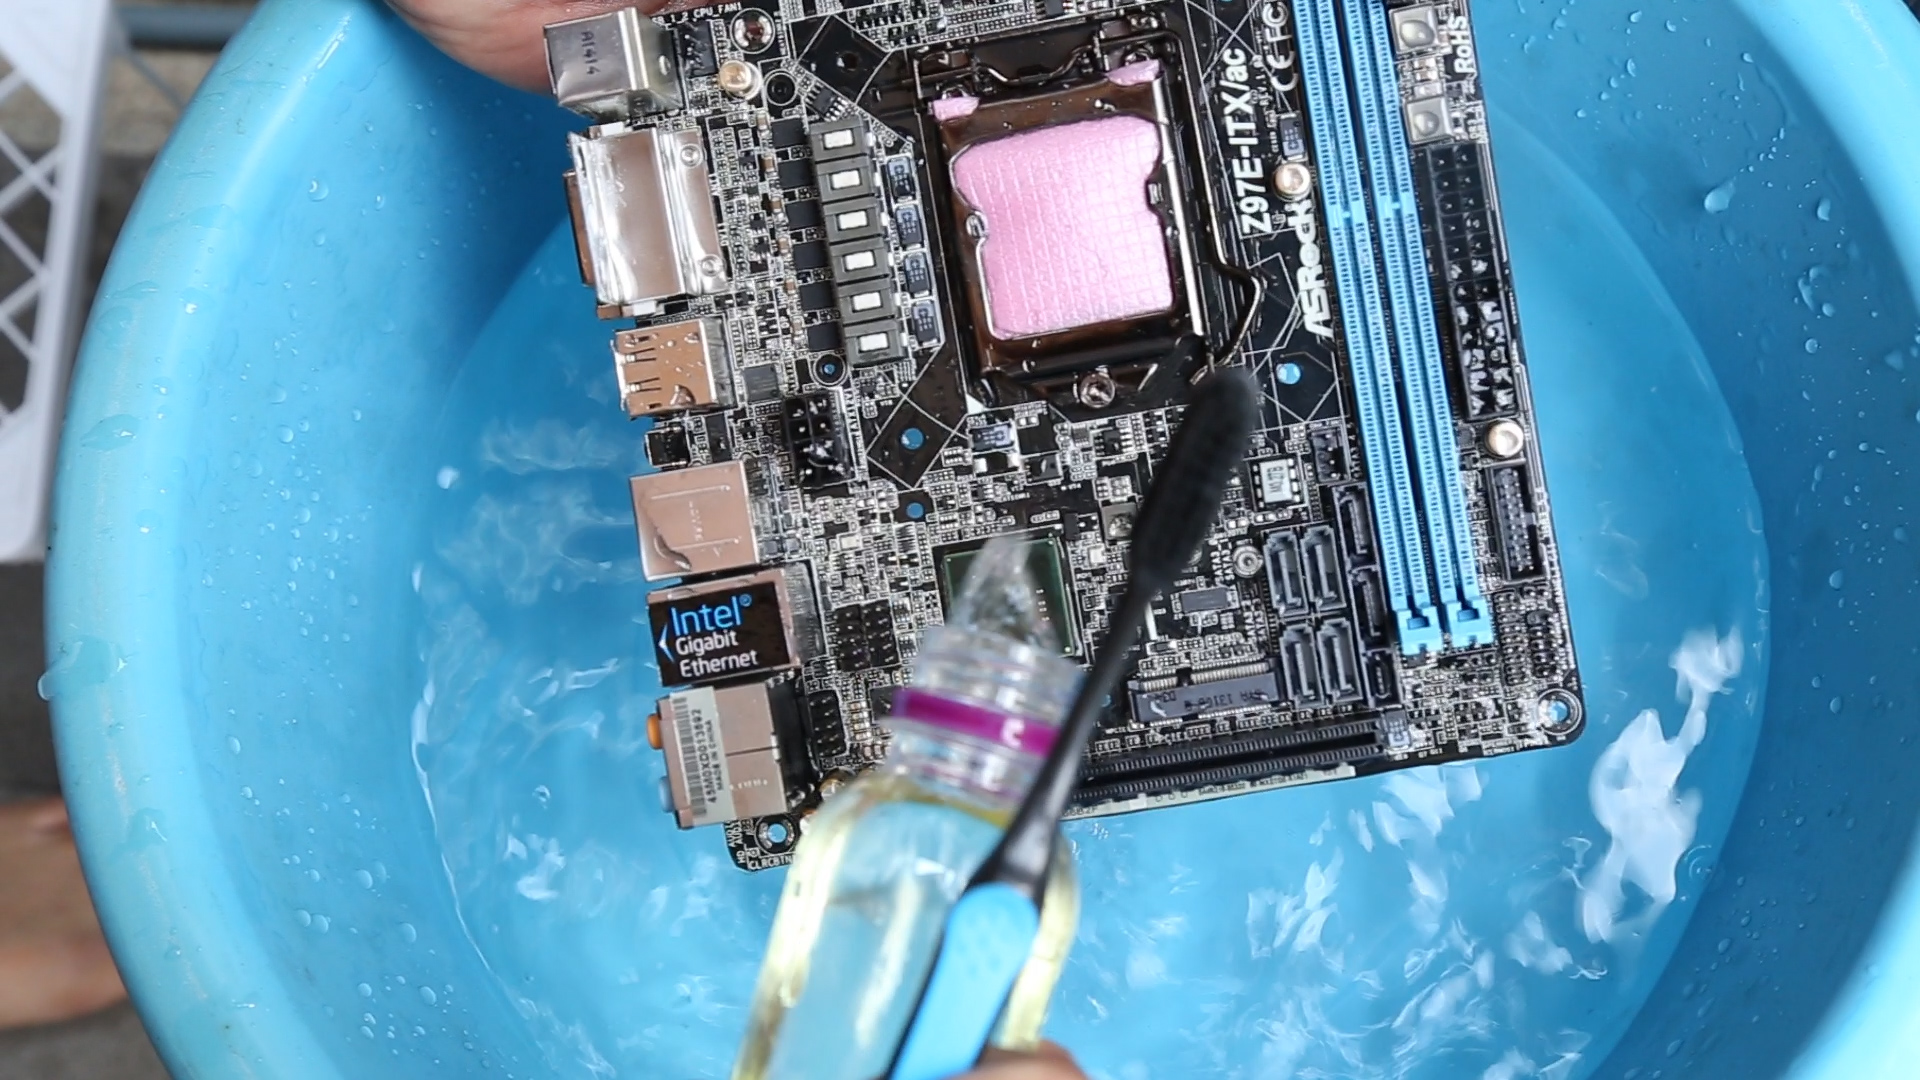 Cleaning mainboard 10